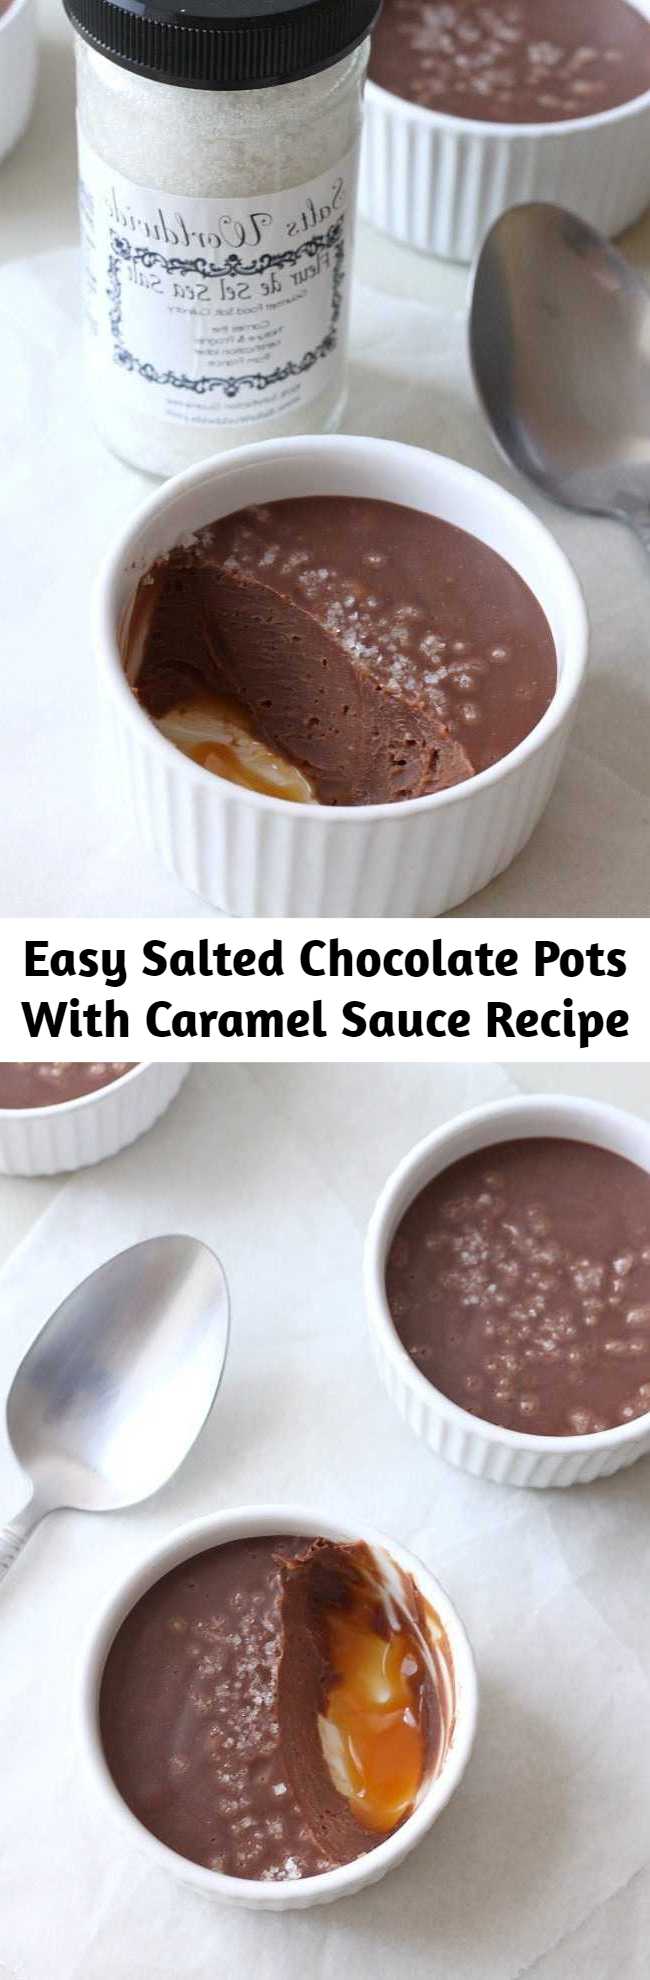 Easy Salted Chocolate Pots With Caramel Sauce Recipe - This salted chocolate pots with caramel recipe makes a delicious, no bake dessert! Easy make ahead instructions for even easier entertaining!